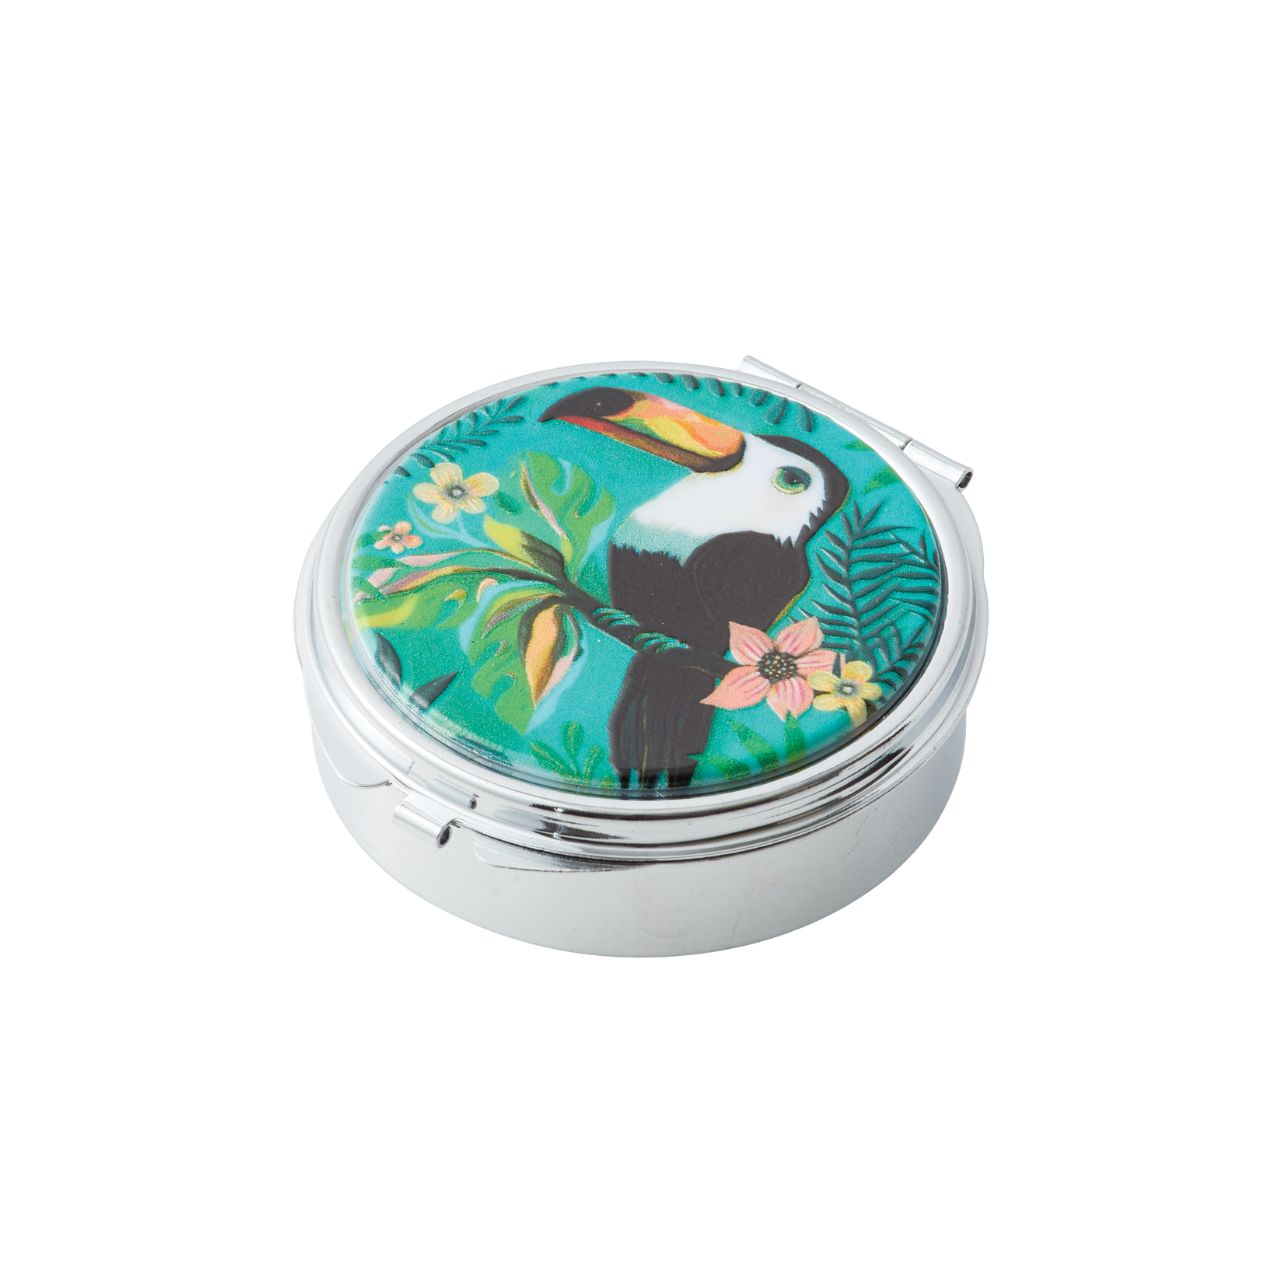 Toucan Tom Trinket Box by Allen Design  This lightweight and durable Toucan Tom trinket box makes a splendid gift for a friend or yourself. They are the perfect size to fit in any purse, make-up bag, carry on, or backpack. And best of all, they are super practical for every day use.